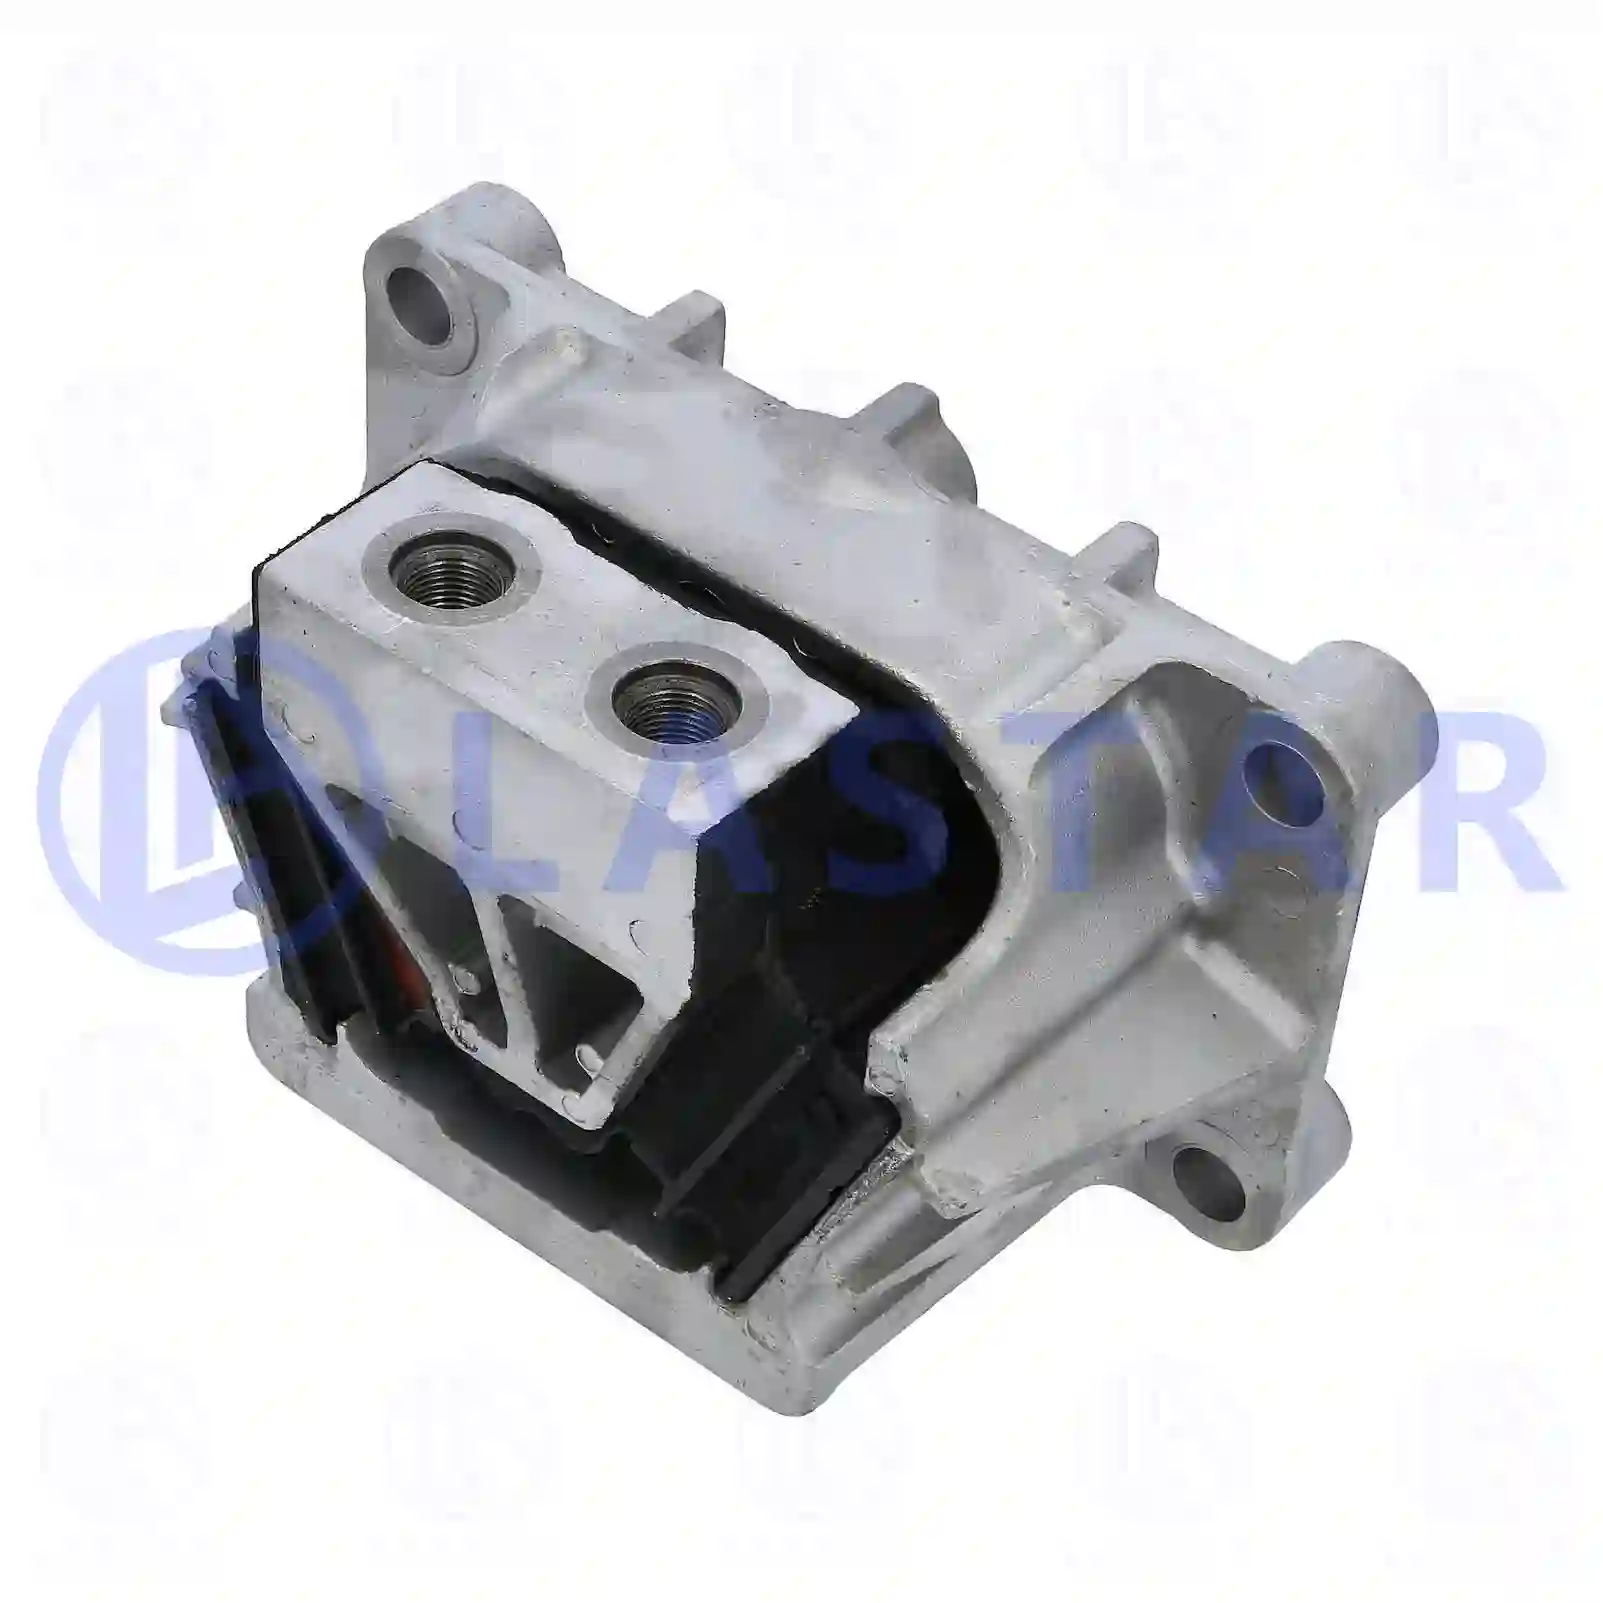 Engine mounting, 77702425, 6282400717, 6282402017, , ||  77702425 Lastar Spare Part | Truck Spare Parts, Auotomotive Spare Parts Engine mounting, 77702425, 6282400717, 6282402017, , ||  77702425 Lastar Spare Part | Truck Spare Parts, Auotomotive Spare Parts